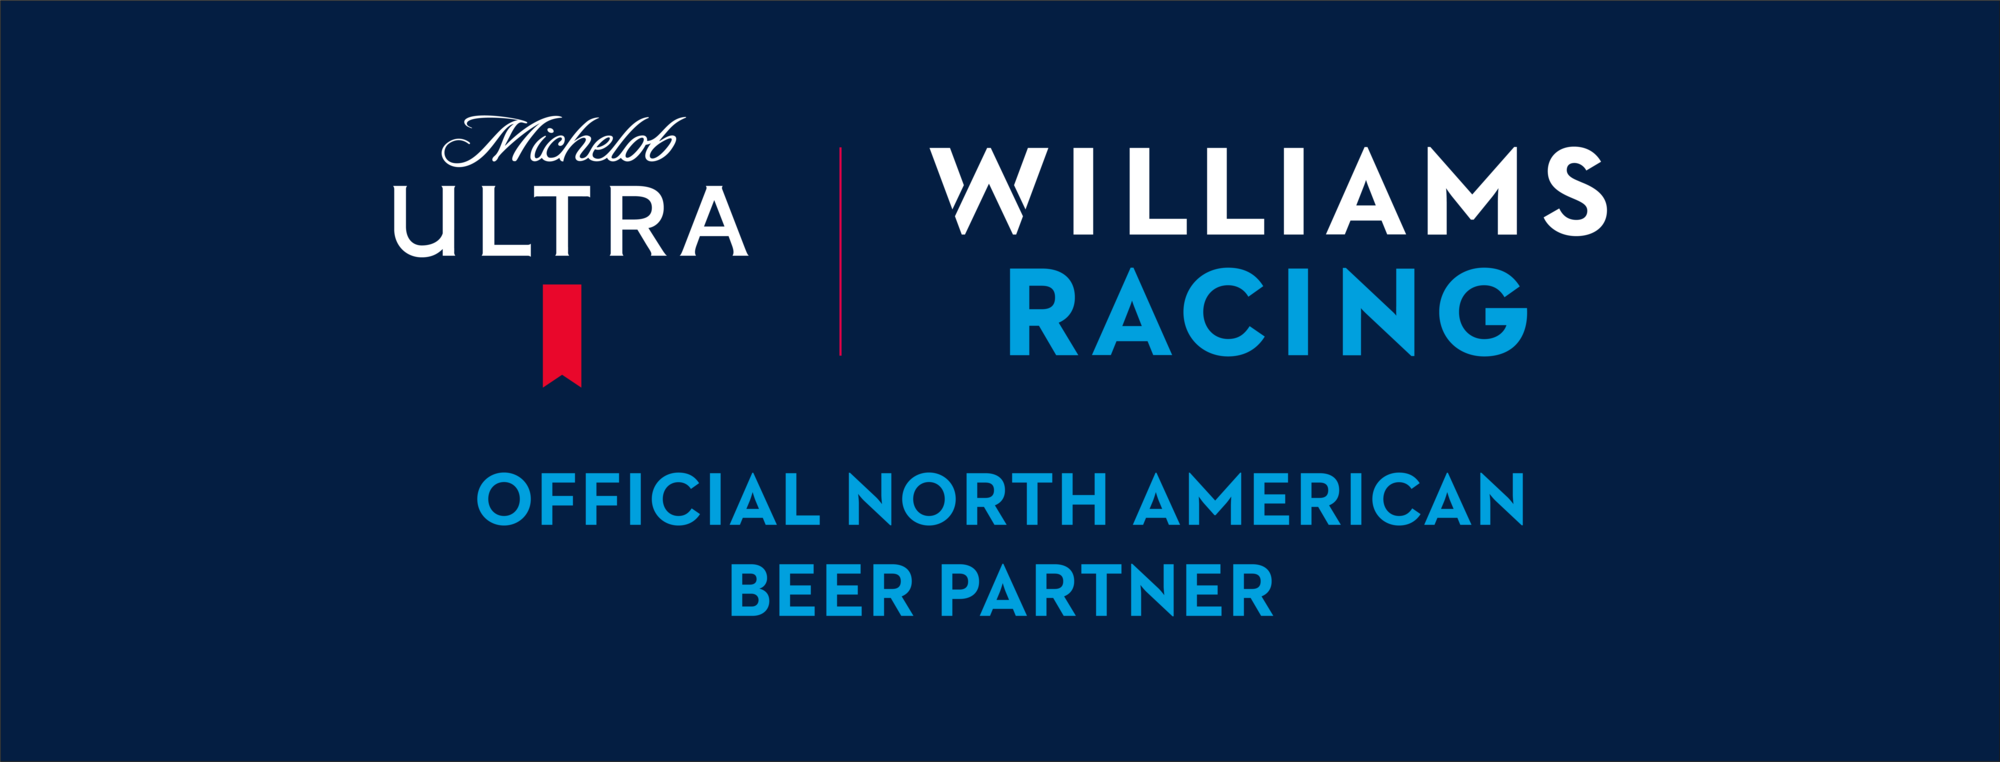 Lights Out and Away We Go! Michelob ULTRA Announces Partnership with Williams Racing